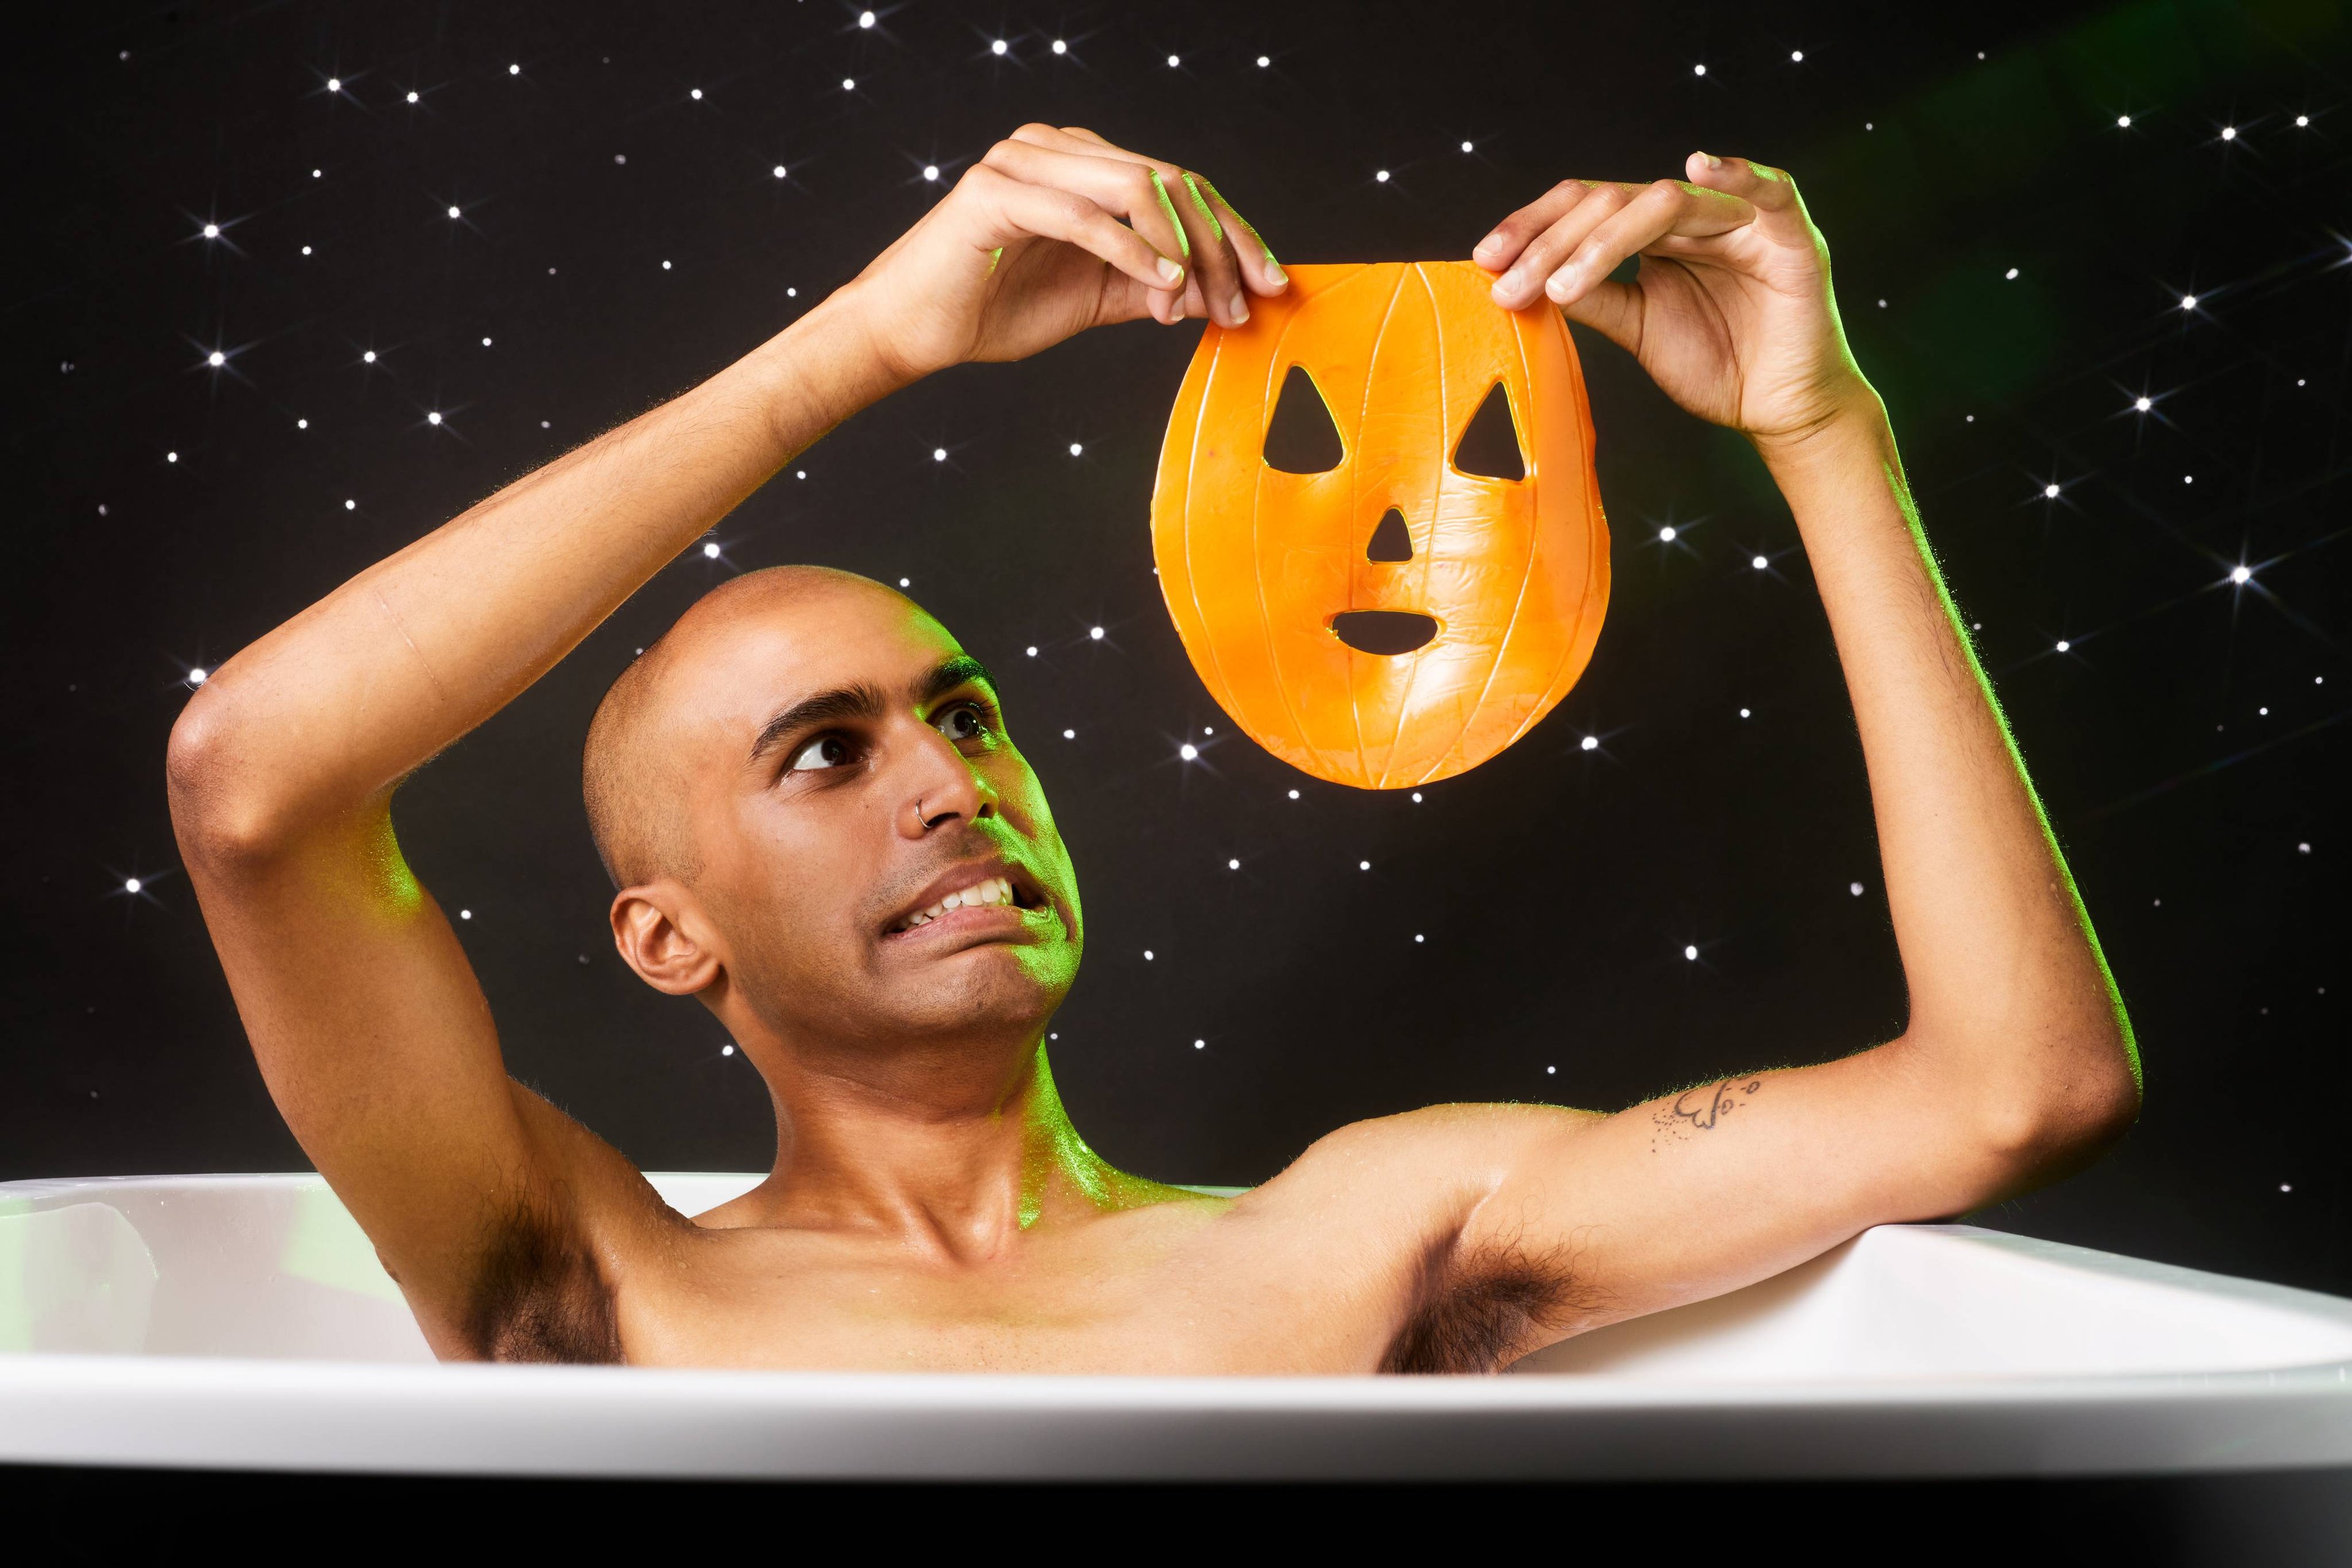 Image shows the model sitting in a bath on a twinkling background. They are holding the orange sheet mask up in the air.